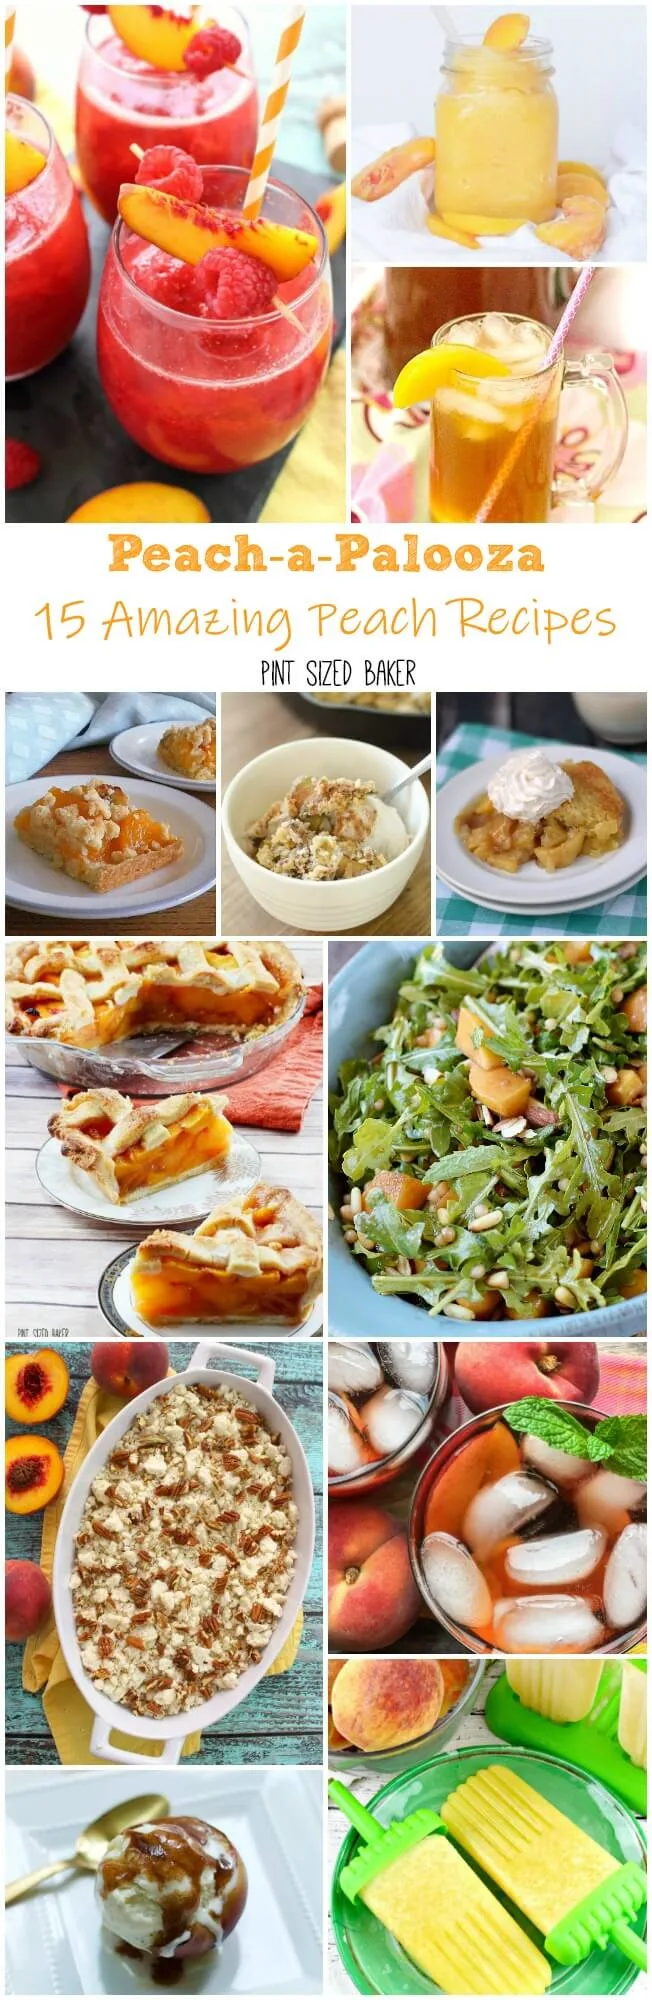 August is National Peach Month so enjoy the Peach-a-Palooza at the farmer's market and make some of these 15 Amazing Peach Recipes.